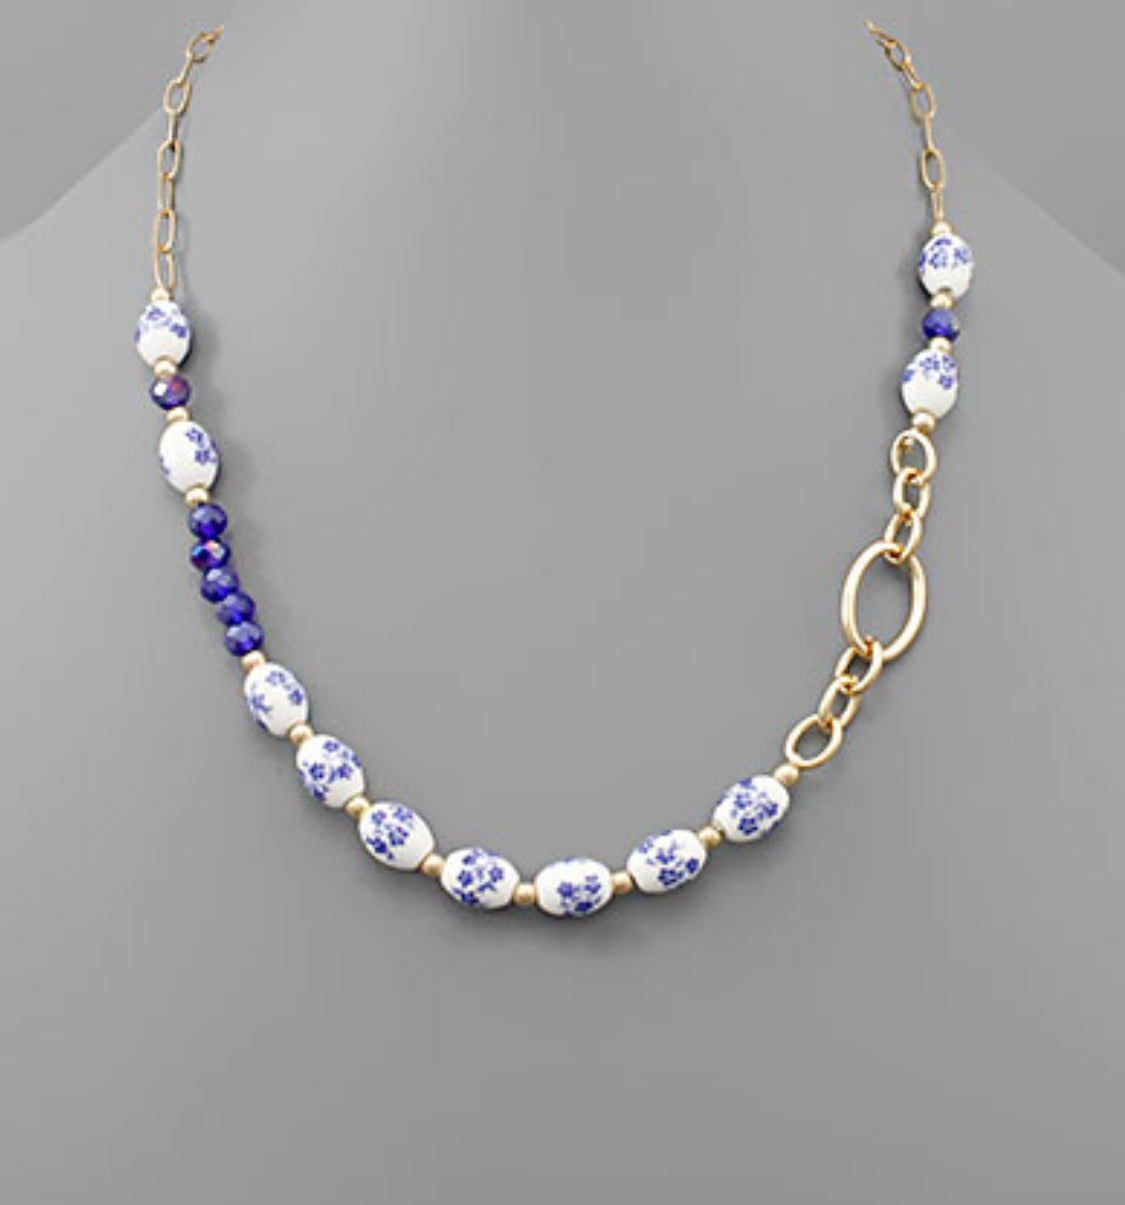 Blue and White Cloisonne Beaded Necklace - RubyVanilla